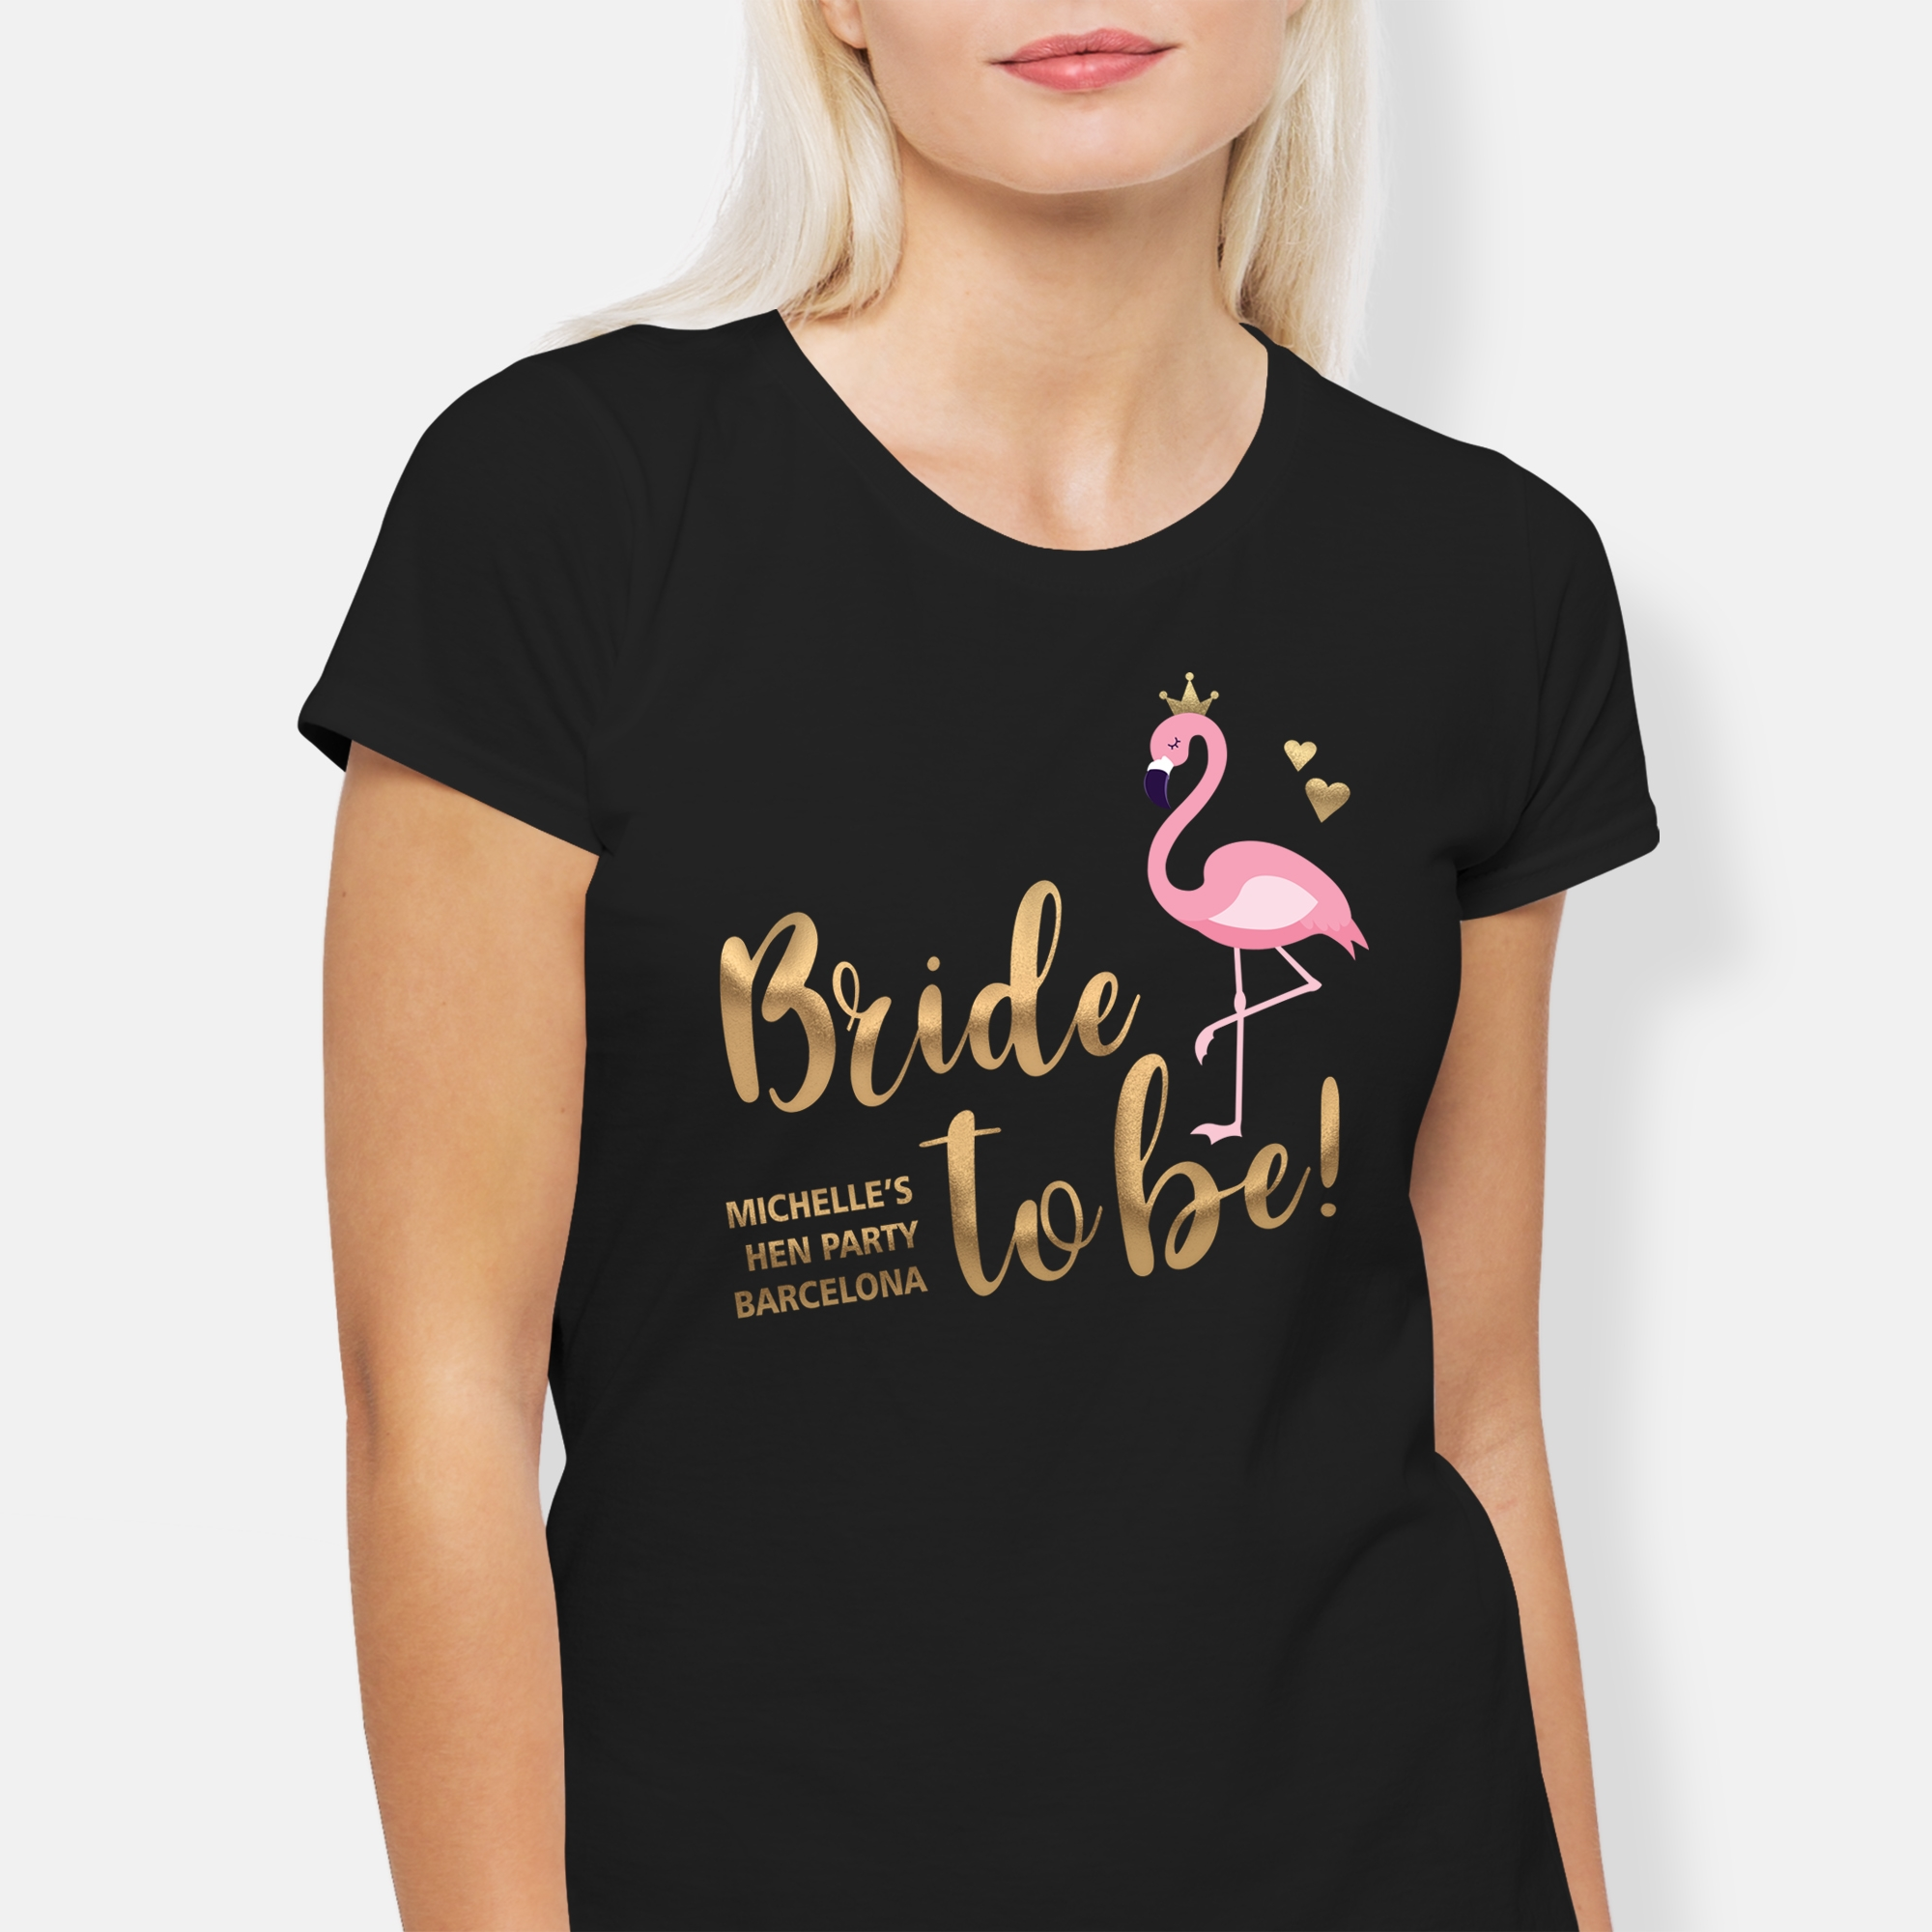 Bride's Flock 'Bride To Be' Hen Party Personalized T-Shirt